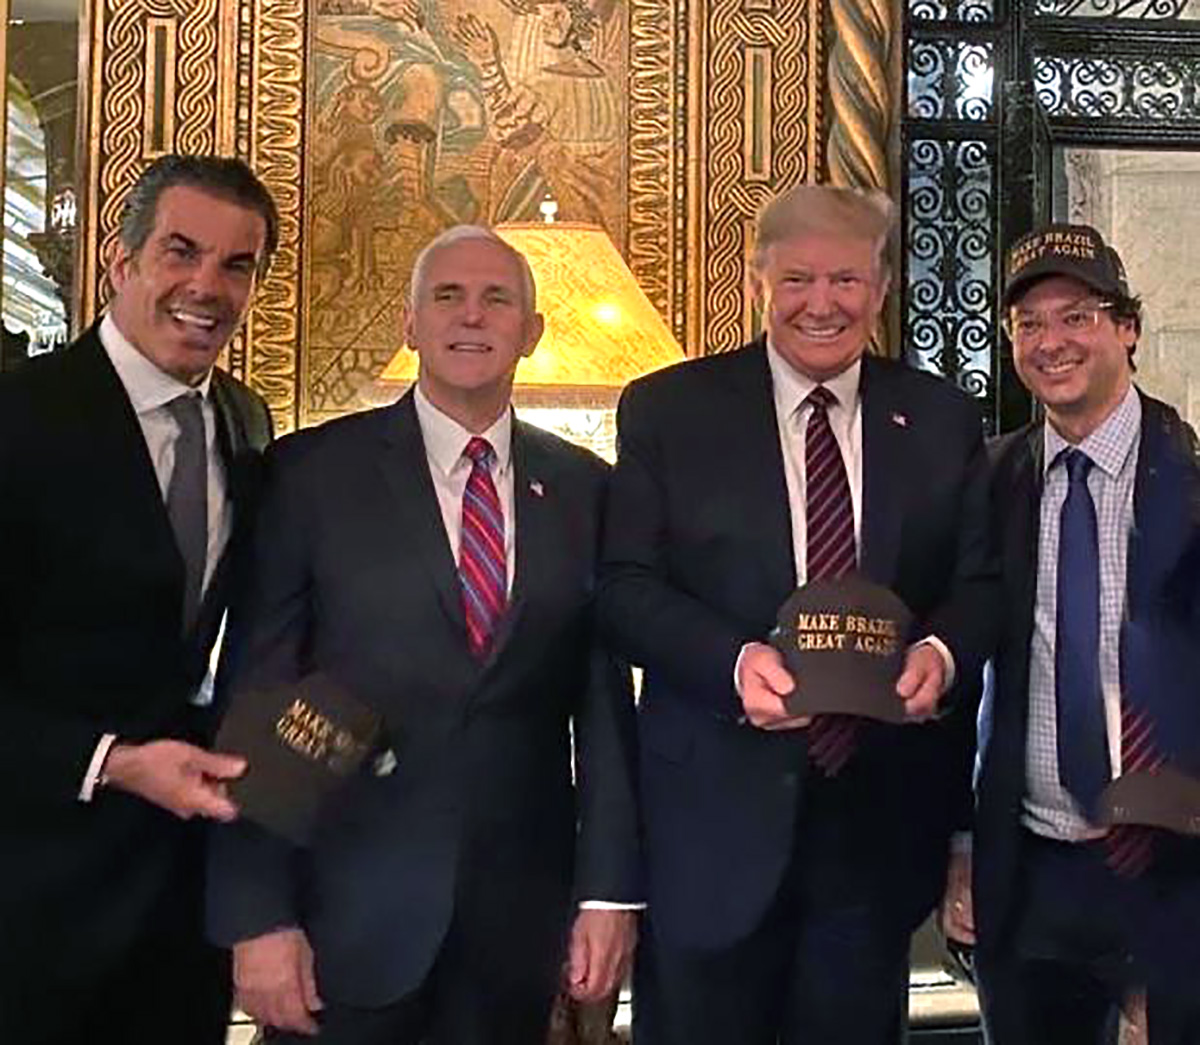 PHOTO: In a photo posted to Instagram, Vice President Mike Pence and President Donald Trump pose with Brazilian PresidentJair Bolsonaro's communications secretary, Fabio Wajngarten, right, during a visit to Mar-a-Lago over the weekend of March 7-8, 2020.